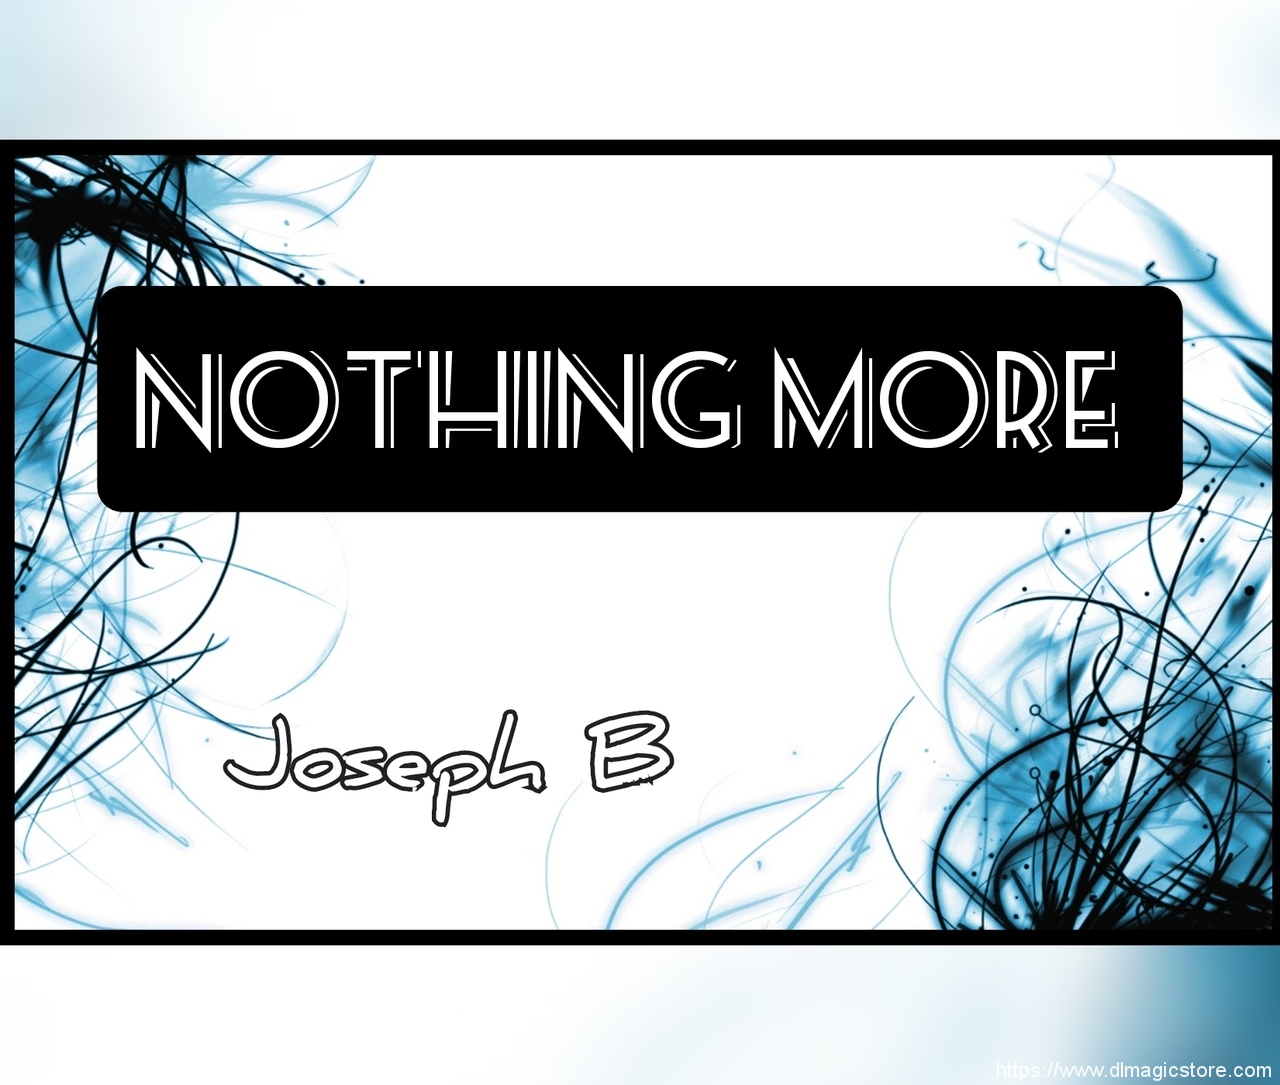 NOTHING MORE by Joseph B. (Packet Trick)